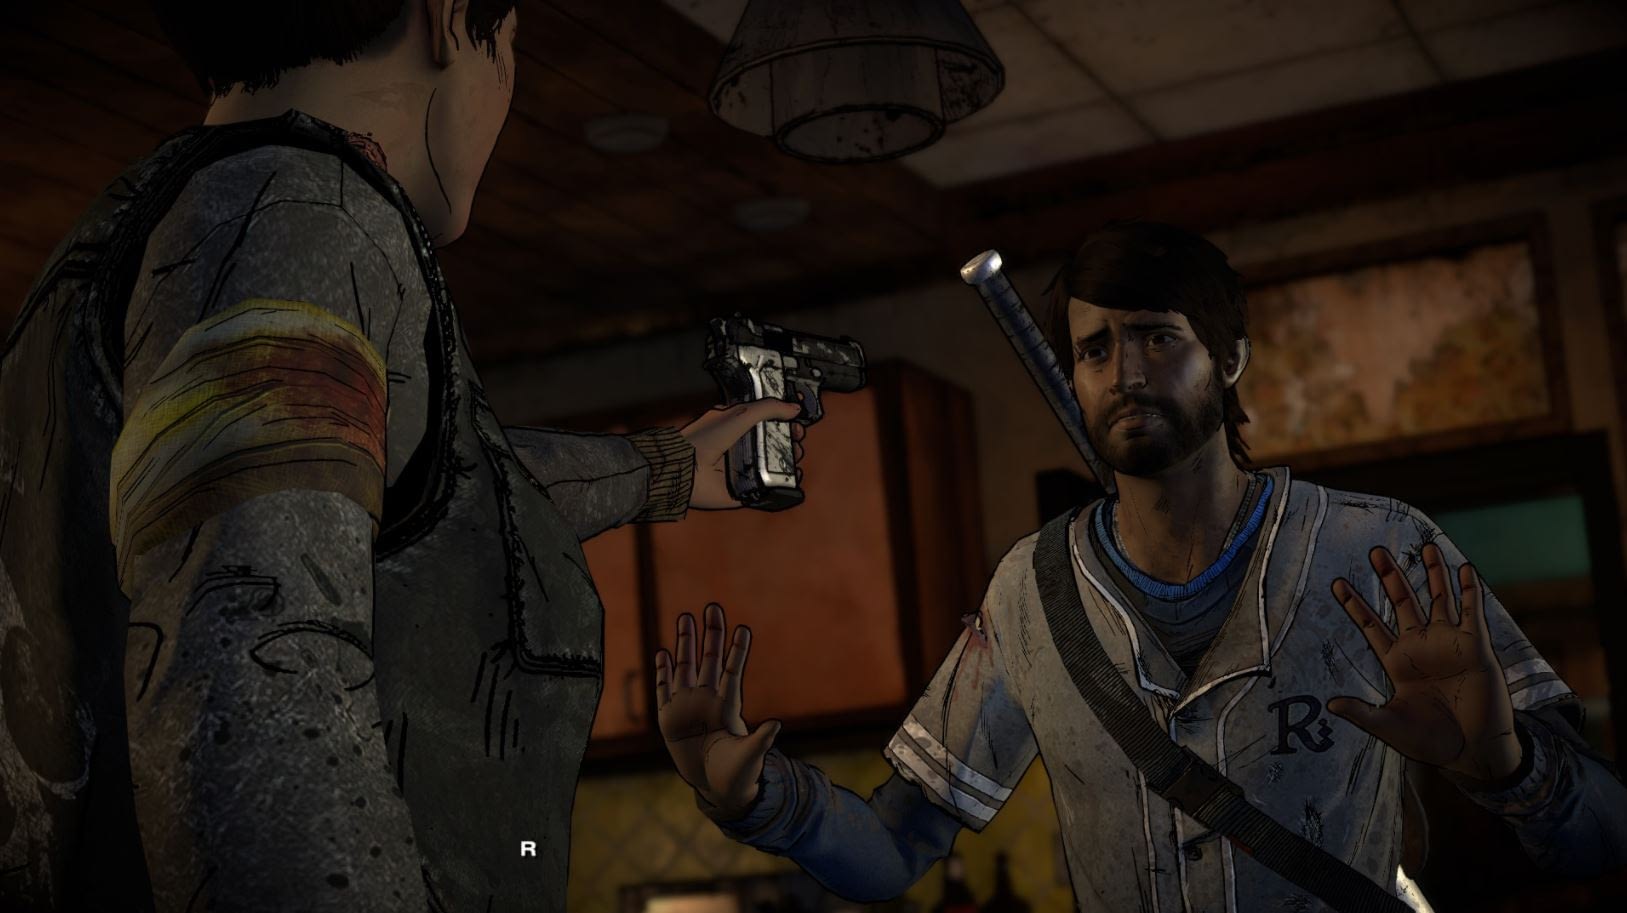 Review: The Walking Dead: The Telltale Series - A New Frontier Episode 5 effectively concludes an uneven season